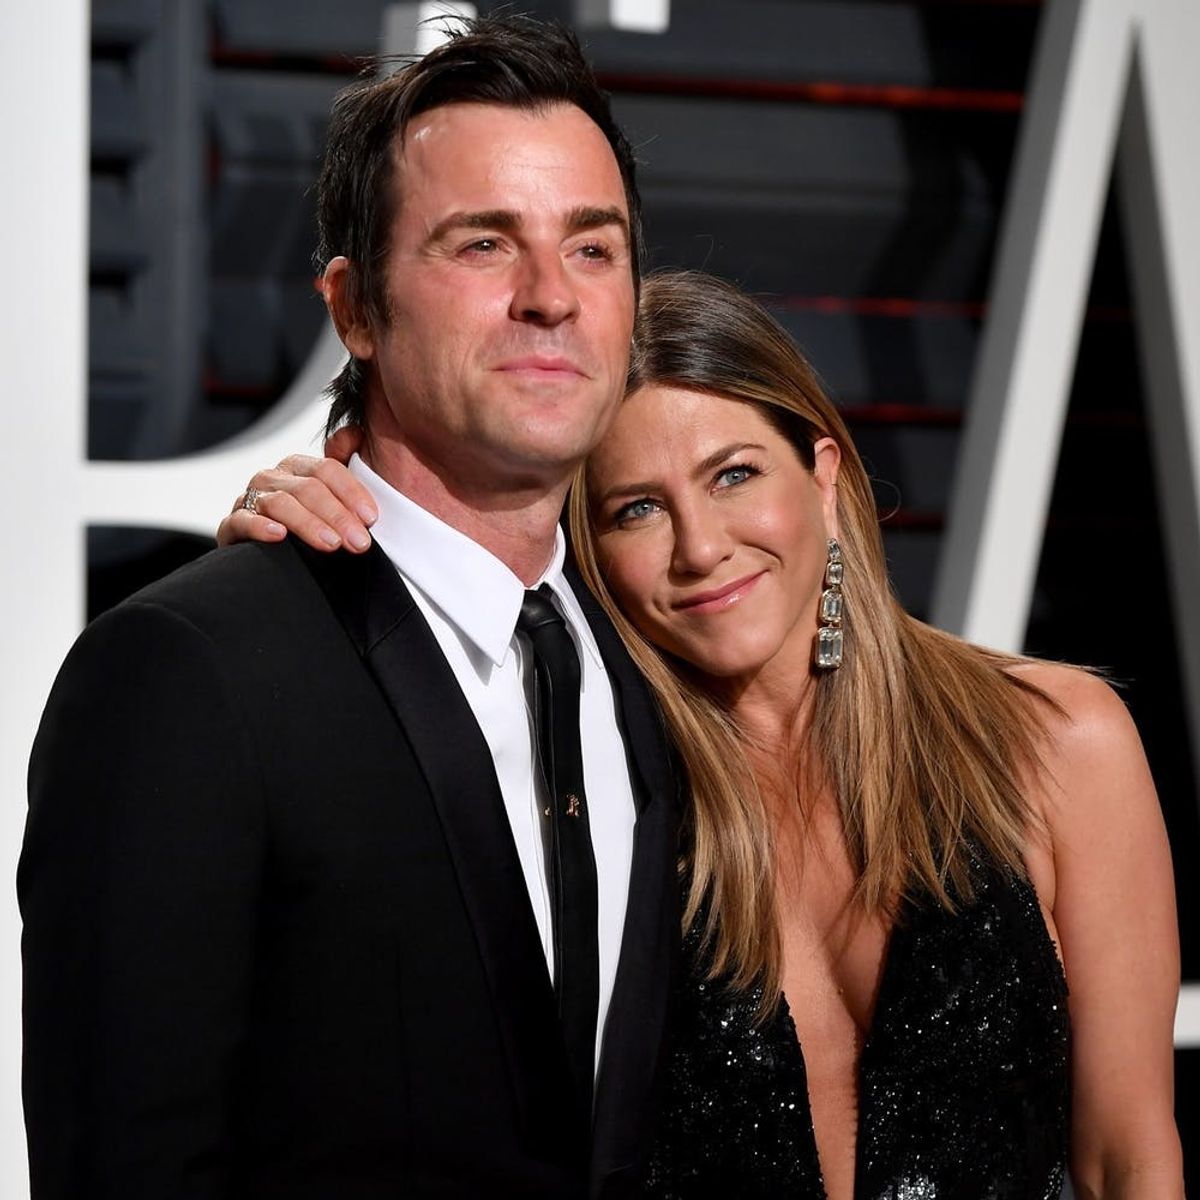 Jennifer Aniston and Justin Theroux ‘Lovingly’ Separate After Two Years of Marriage